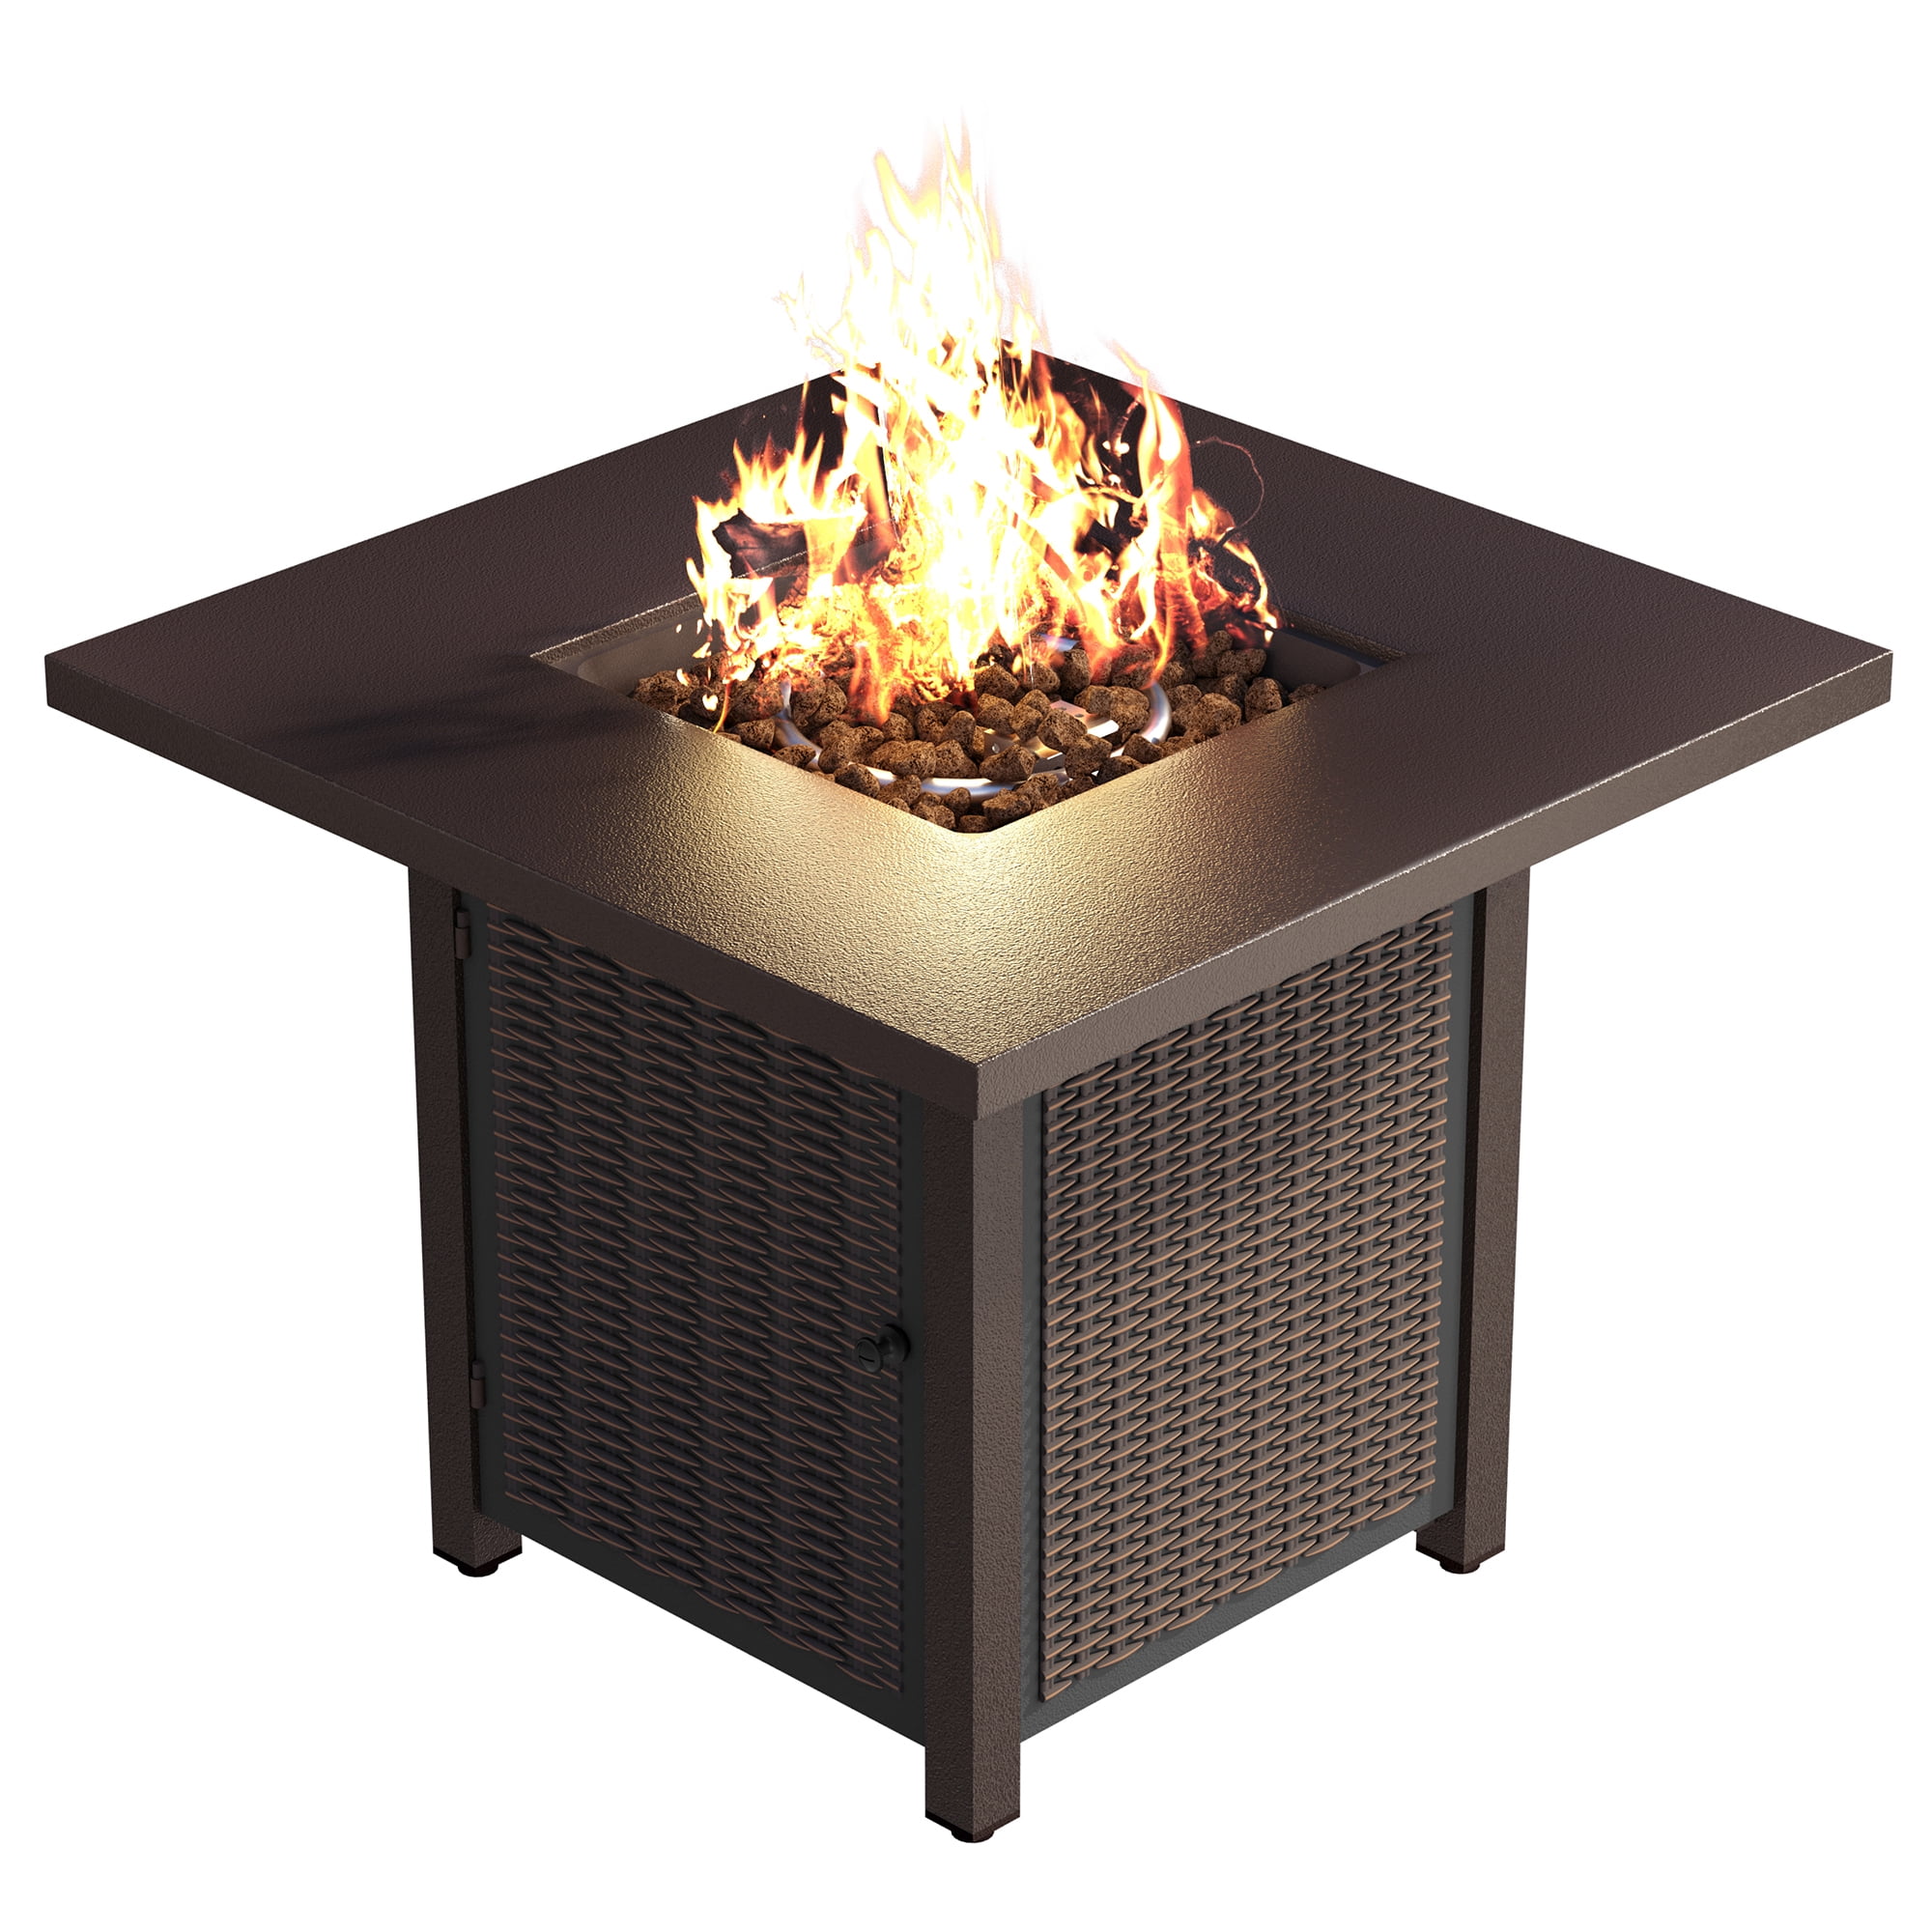 Outside Party Rattan & Wicker Base Patio 50000 BTU Square Gas Fire Table with Lid & Lava Rock Firepit Table for Outdoor LEGACY HEATING 32 inch Gas Propane Fire Pit Table Yard Grey and Black 